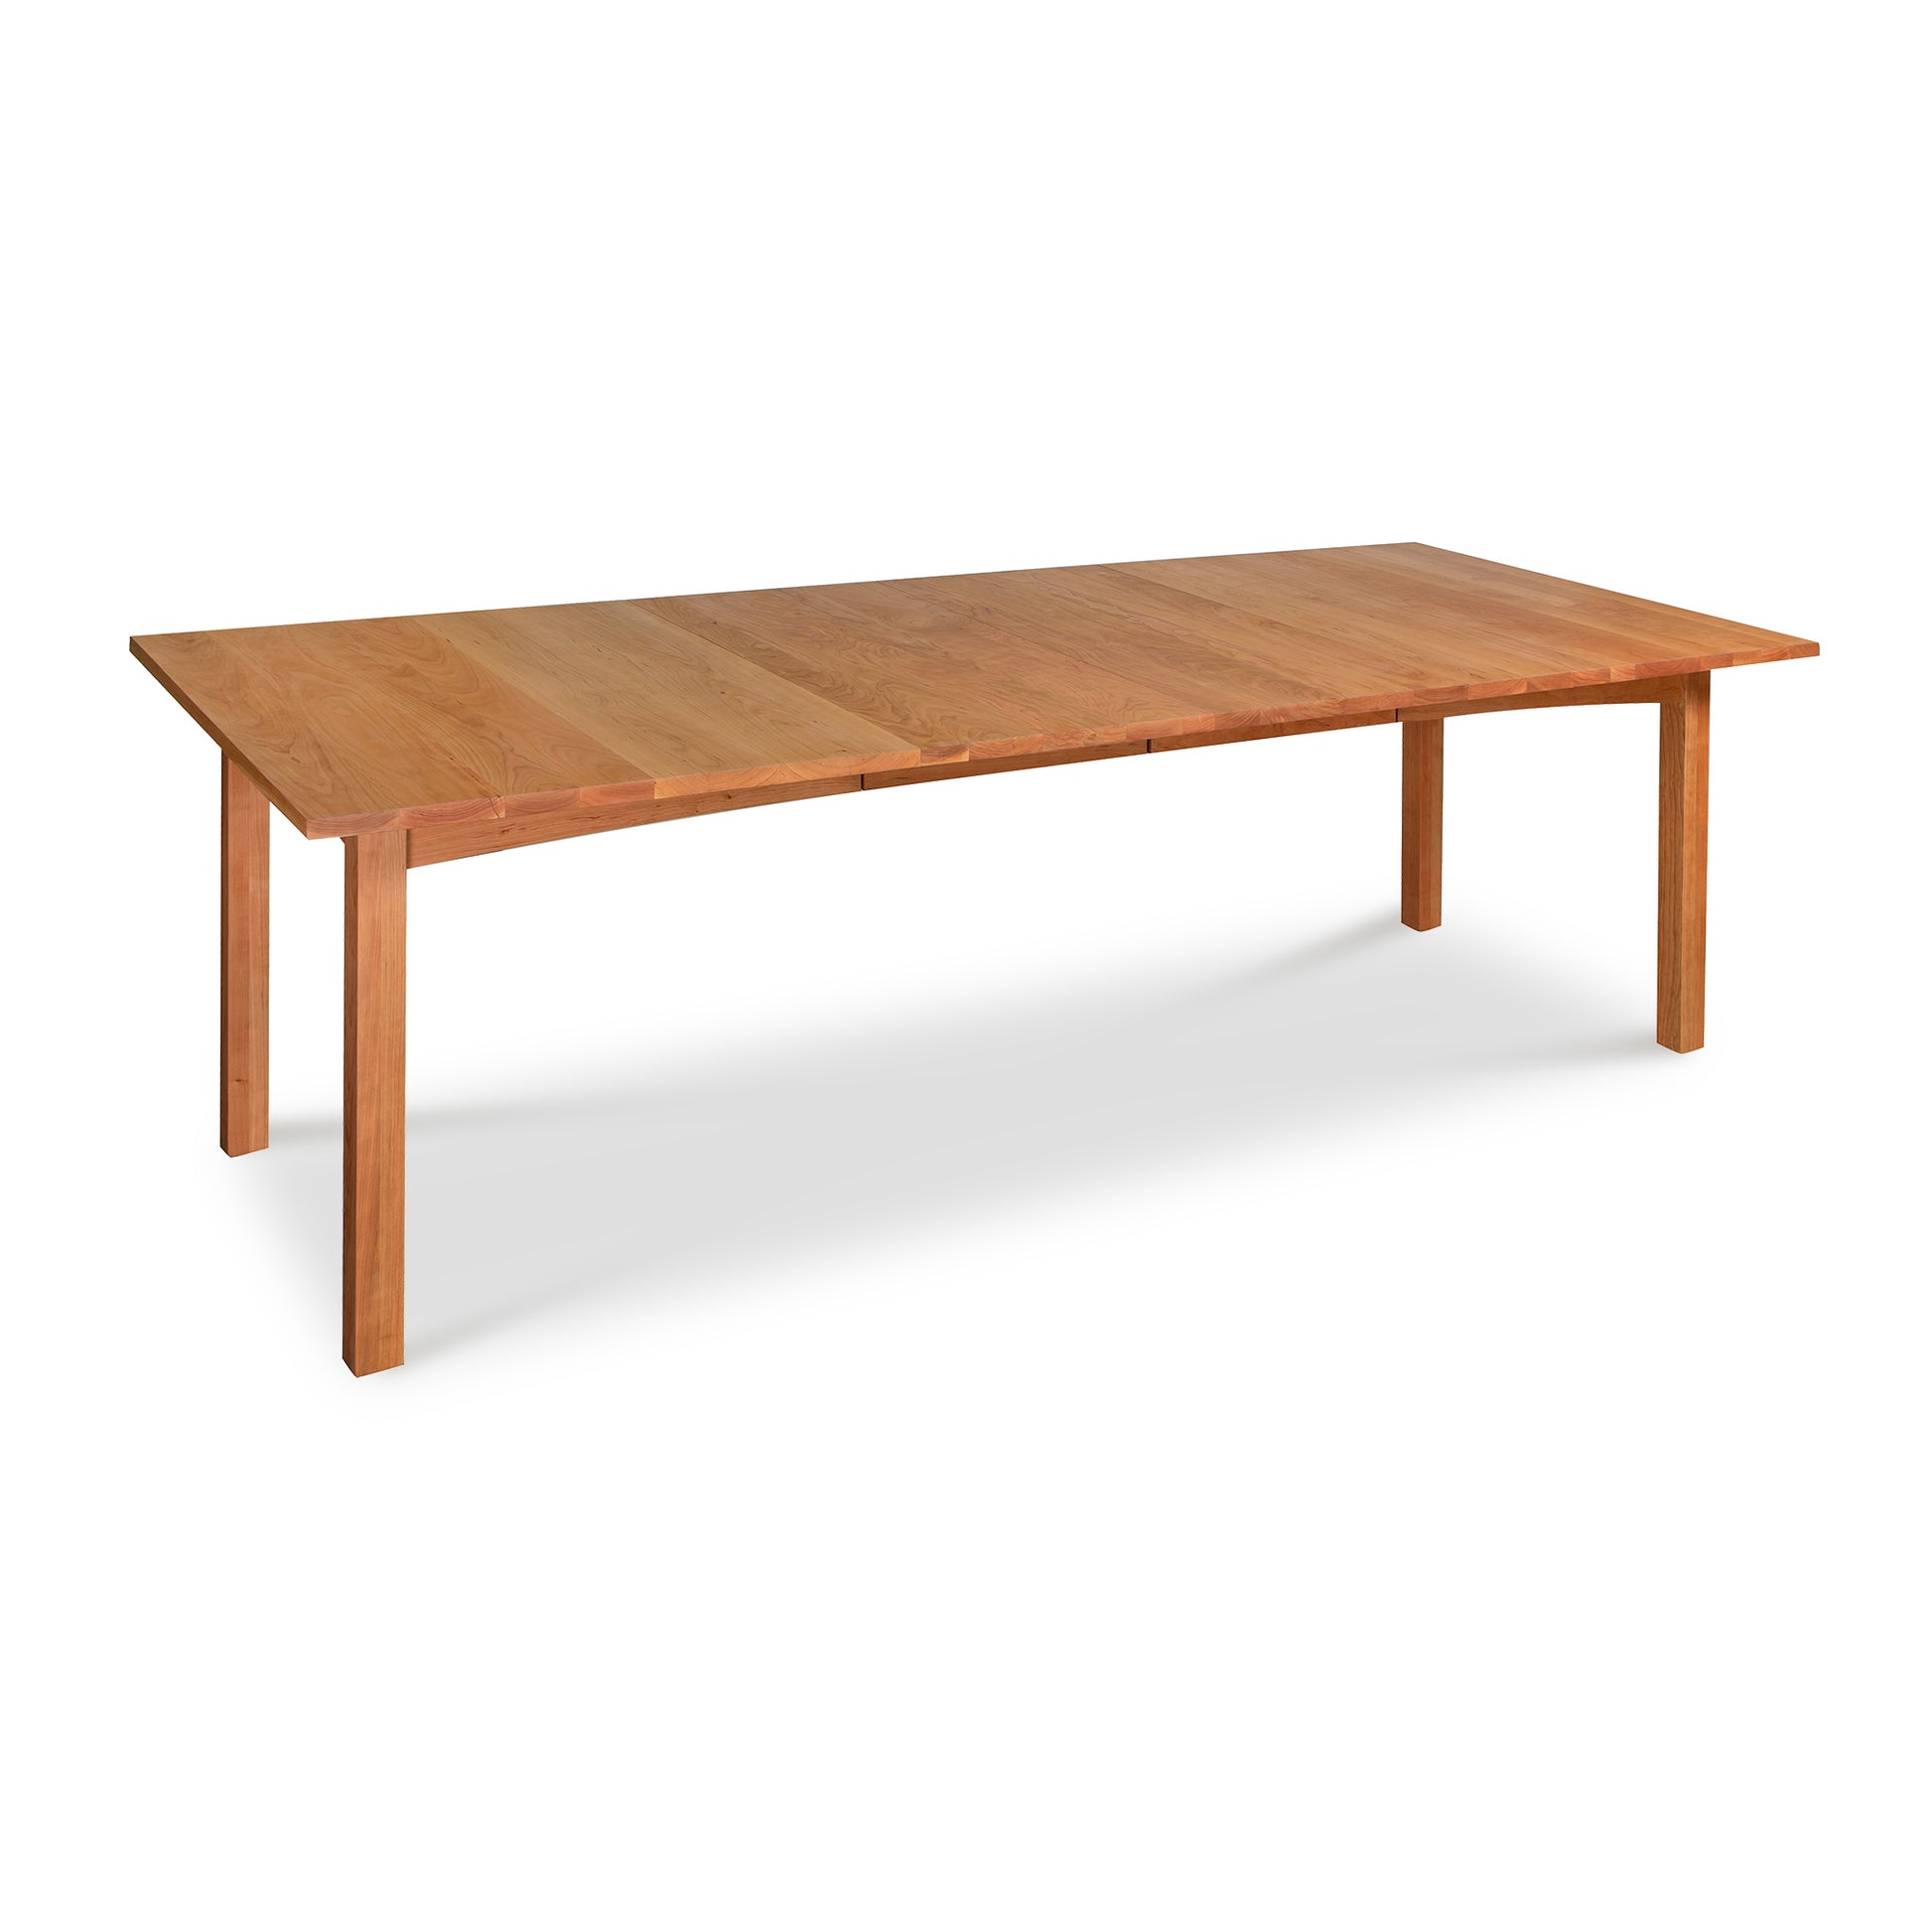 A solid woods Vermont Furniture Designs Burlington Shaker Extension Dining Table on a plain white background.